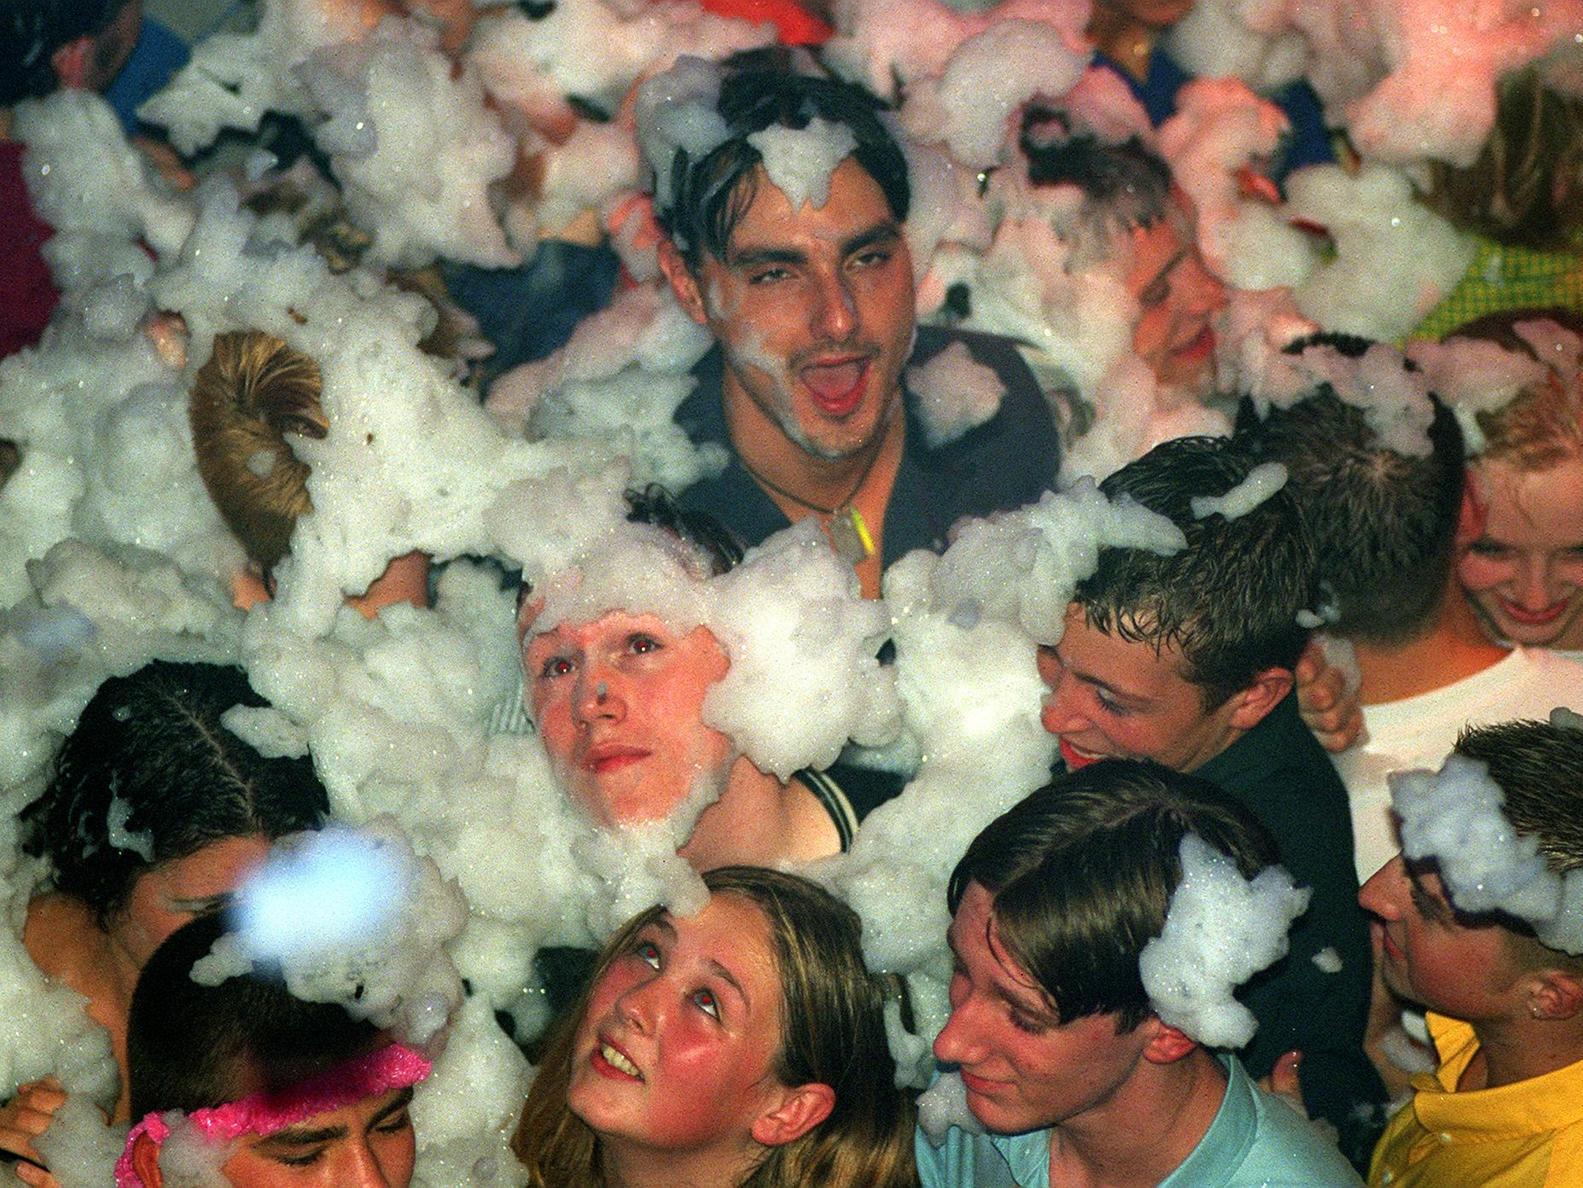 Were you at the Club Barcelona foam party in the summer of 1998?